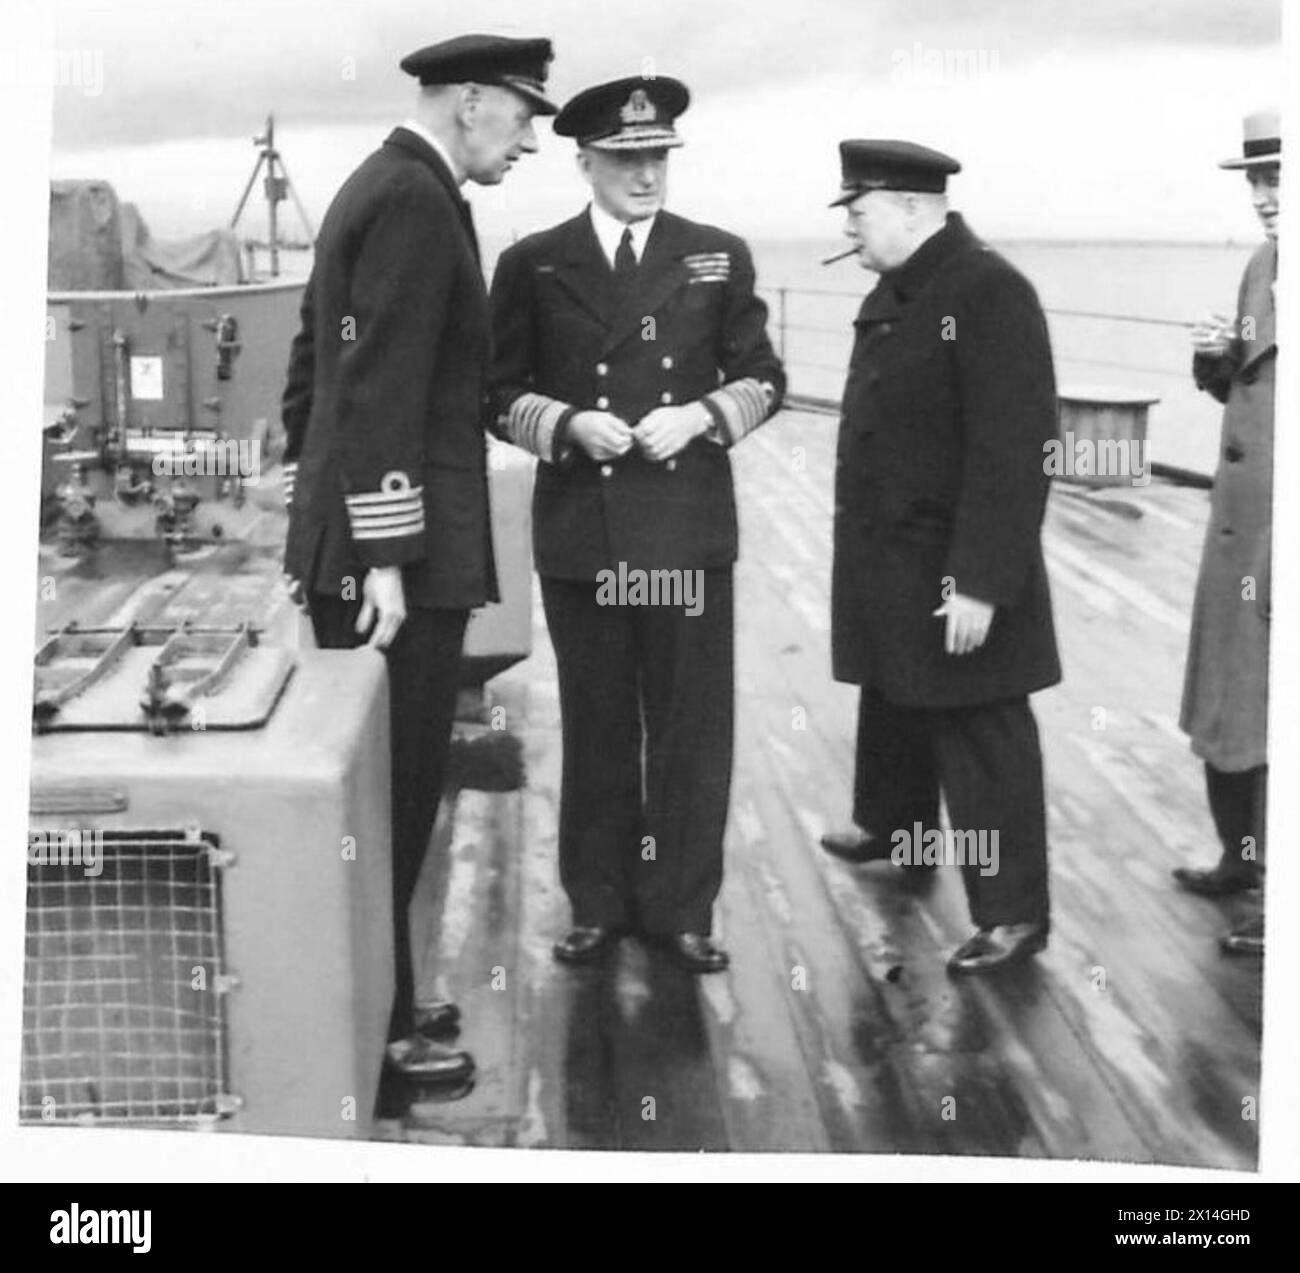 THE PRIME MINISTER AND PARTY ON THEIR WAY ACROSS THE ATALANTIC TO MEET PRESIDENT ROOSEVELT - The Prime Minister, Captain J.C. Leach (Captain of HMS Prince of Wales) and Admiral Sir Dudley Pound (1st Sea Lord) on board HMS Prince of Wales British Army Stock Photo